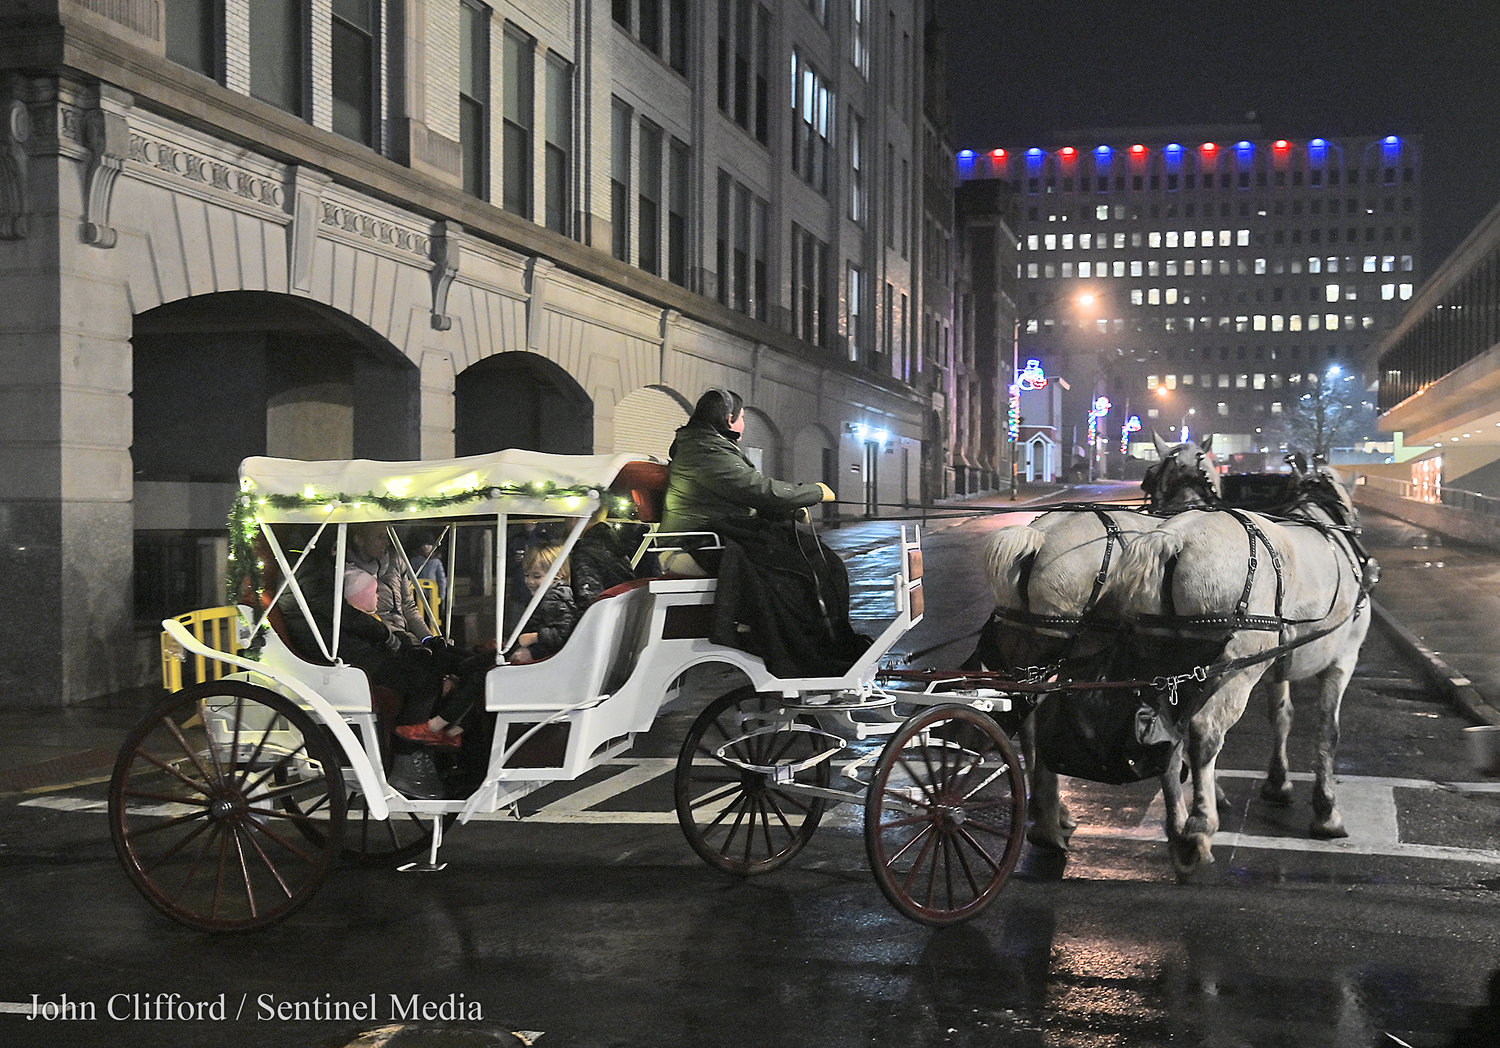 The Bank of Utica New Year's Eve celebration with the horse and carriage rides offered by Lamplit Farms- the carriage was turning up Devereux St. December 31, 2022.